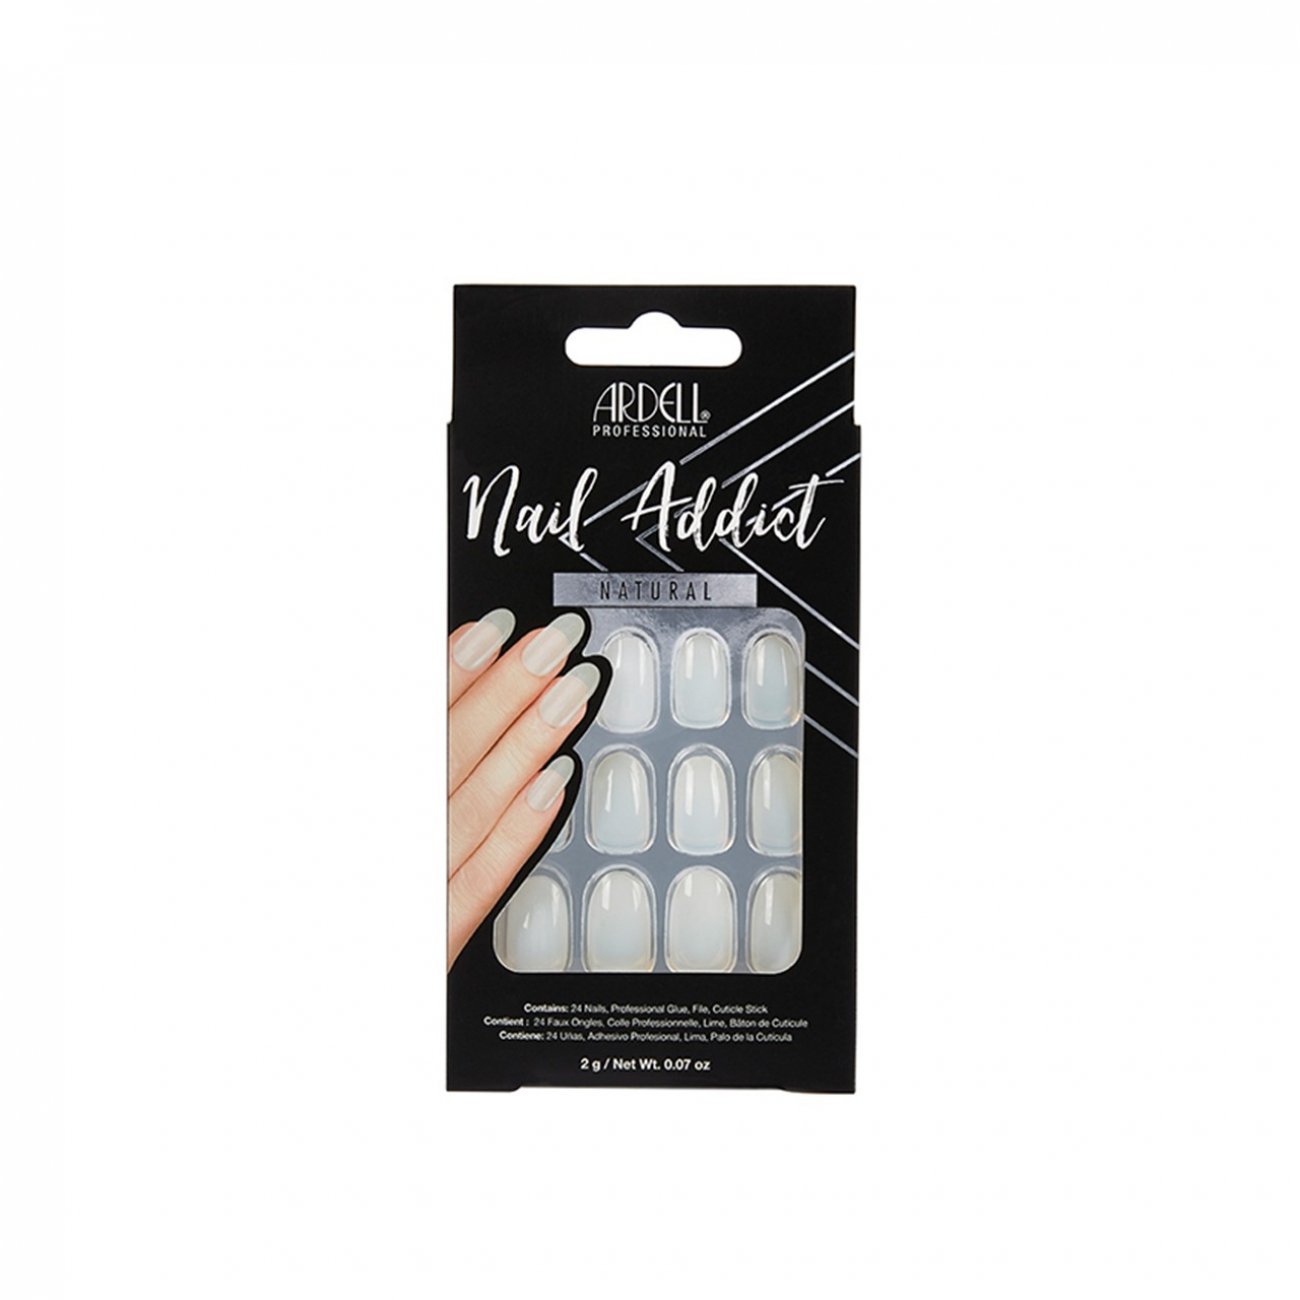 Buy Ardell Nail Addict Natural Artificial Nails Oval x24 · Russia